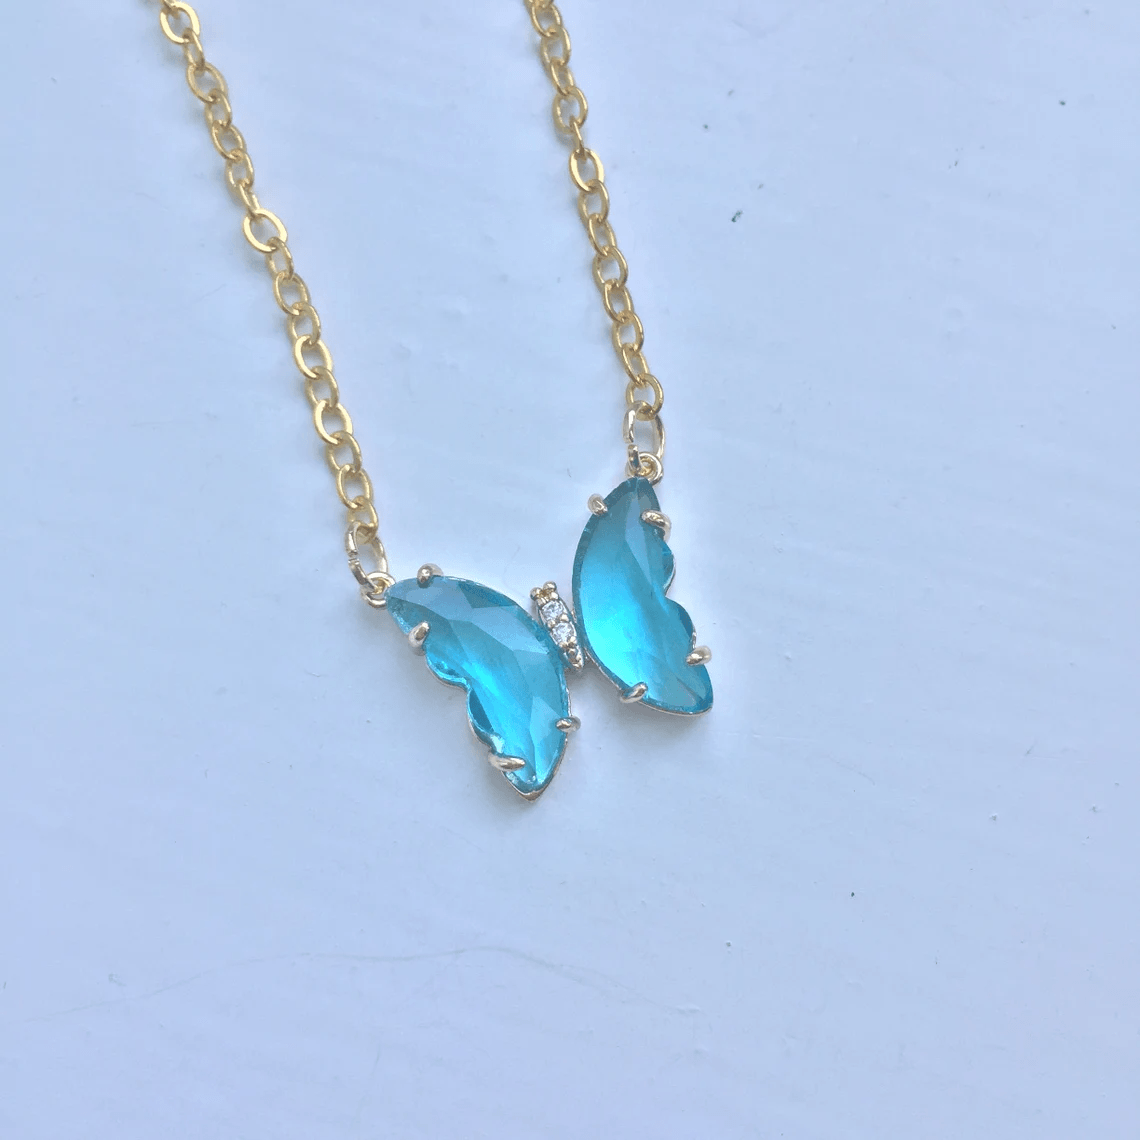 Crystal Butterfly Necklace - Pura Jewels